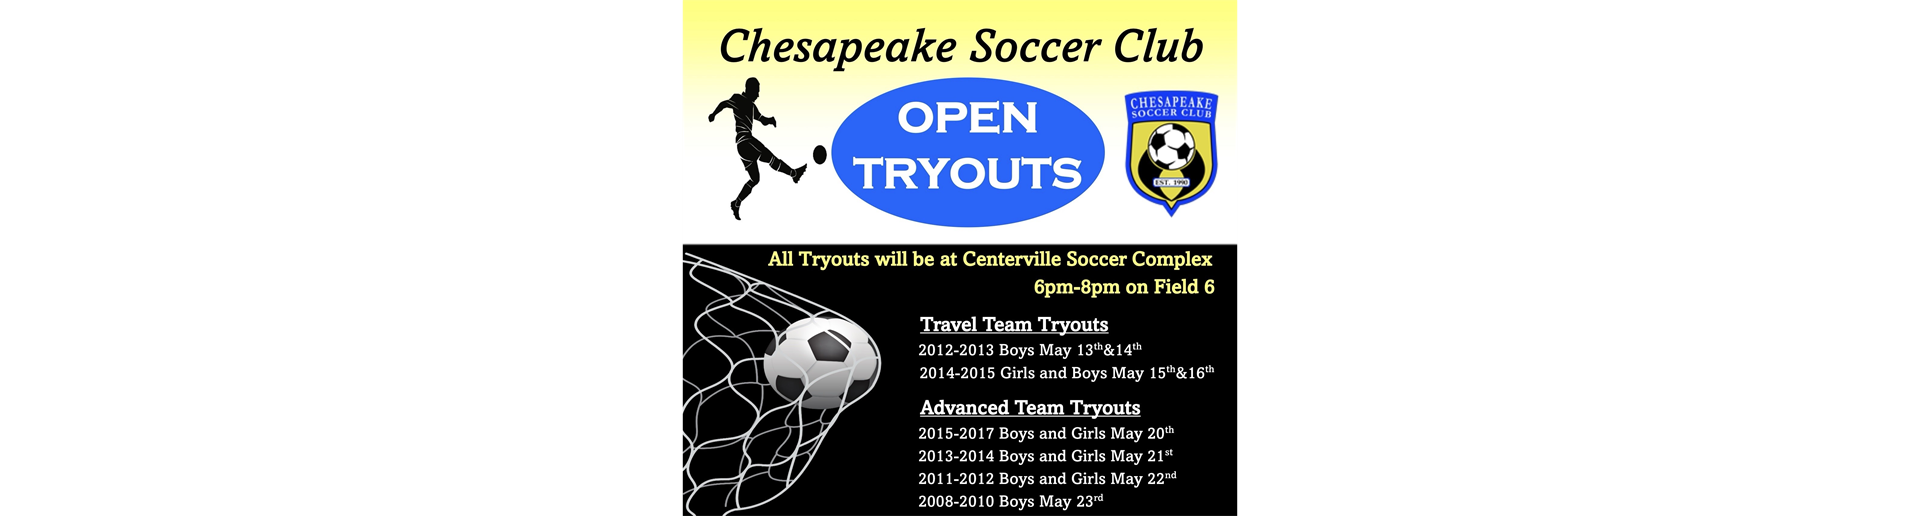 CSC Open Tryouts